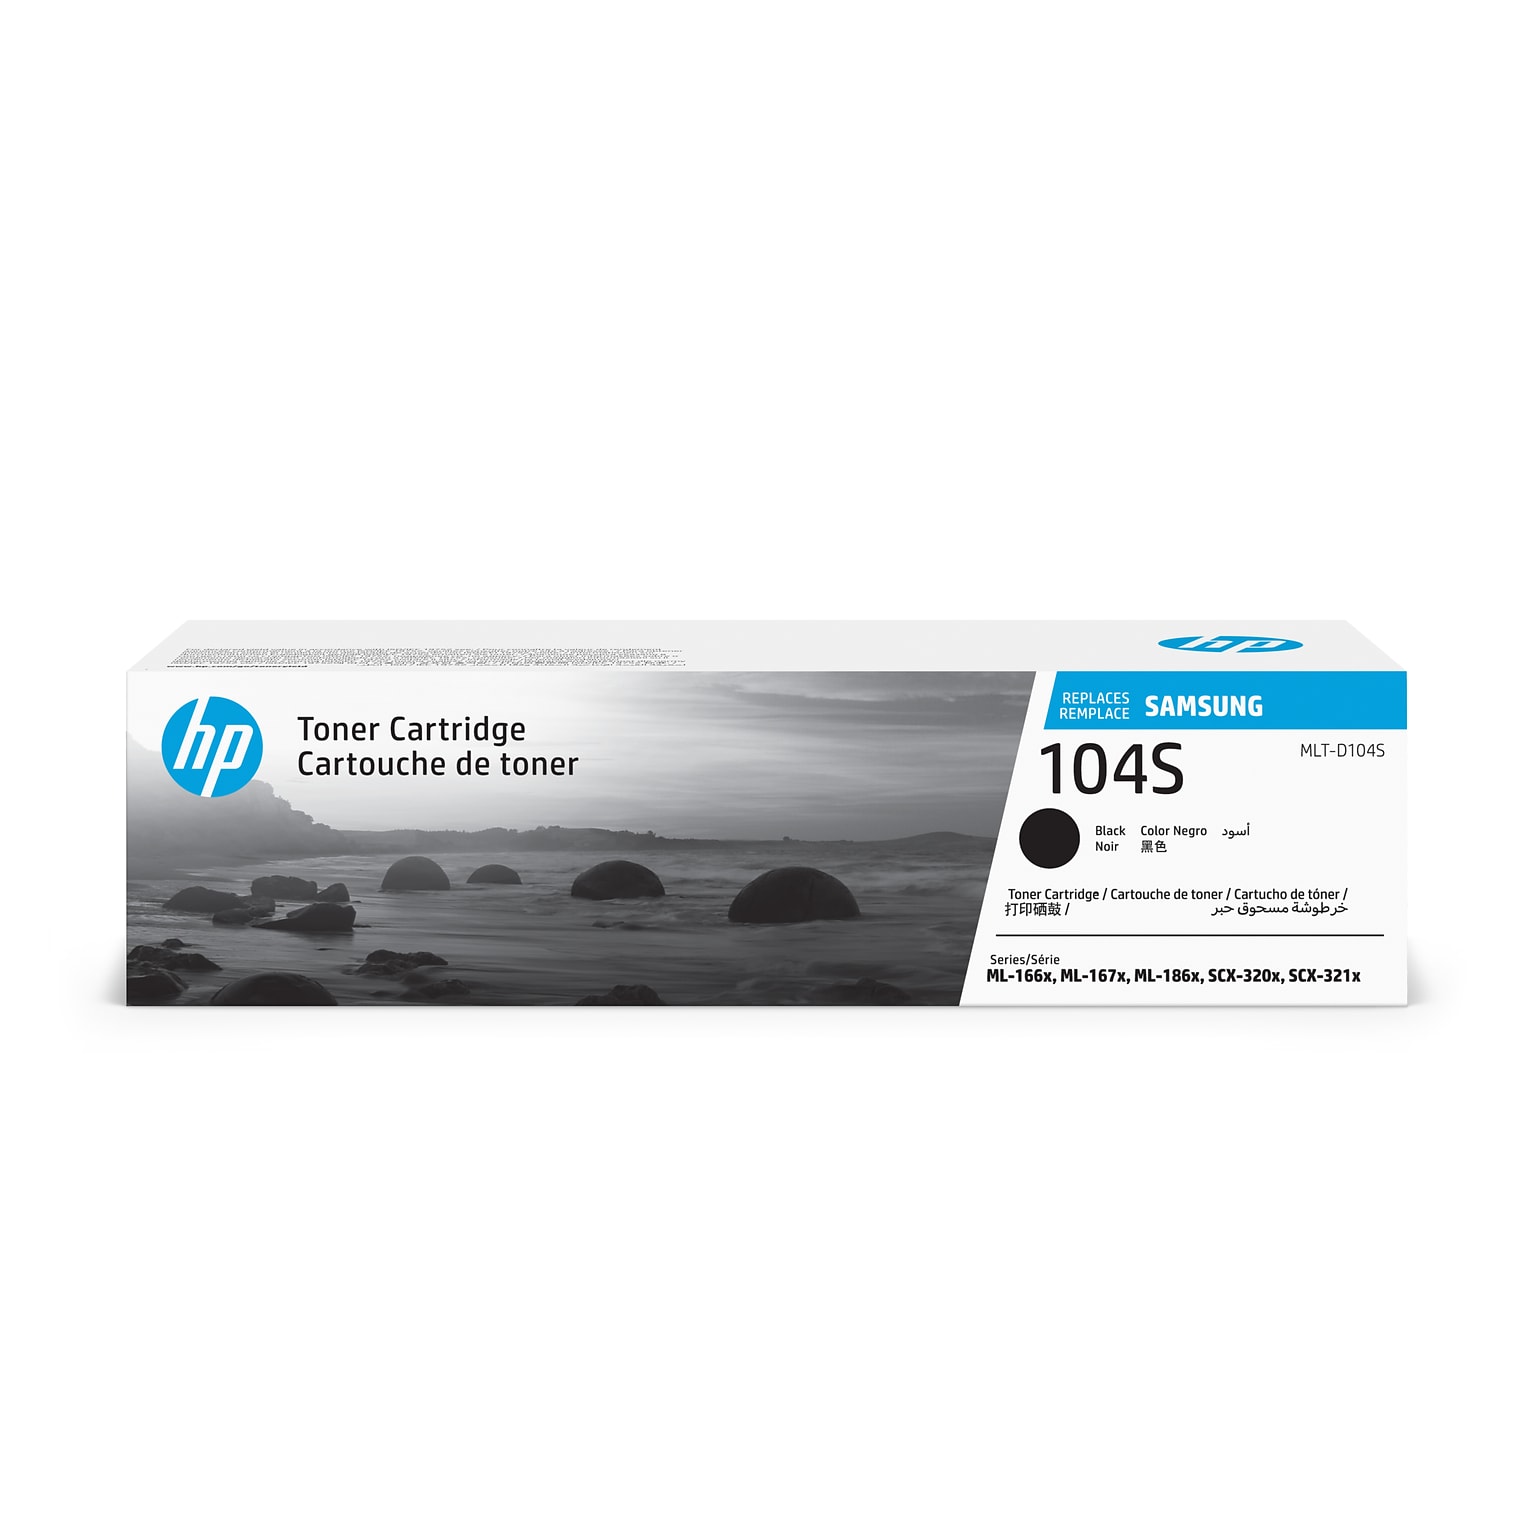 HP 104S Black Toner Cartridge for Samsung MLT-D104S (SU748), Samsung-branded printer supplies are now HP-branded